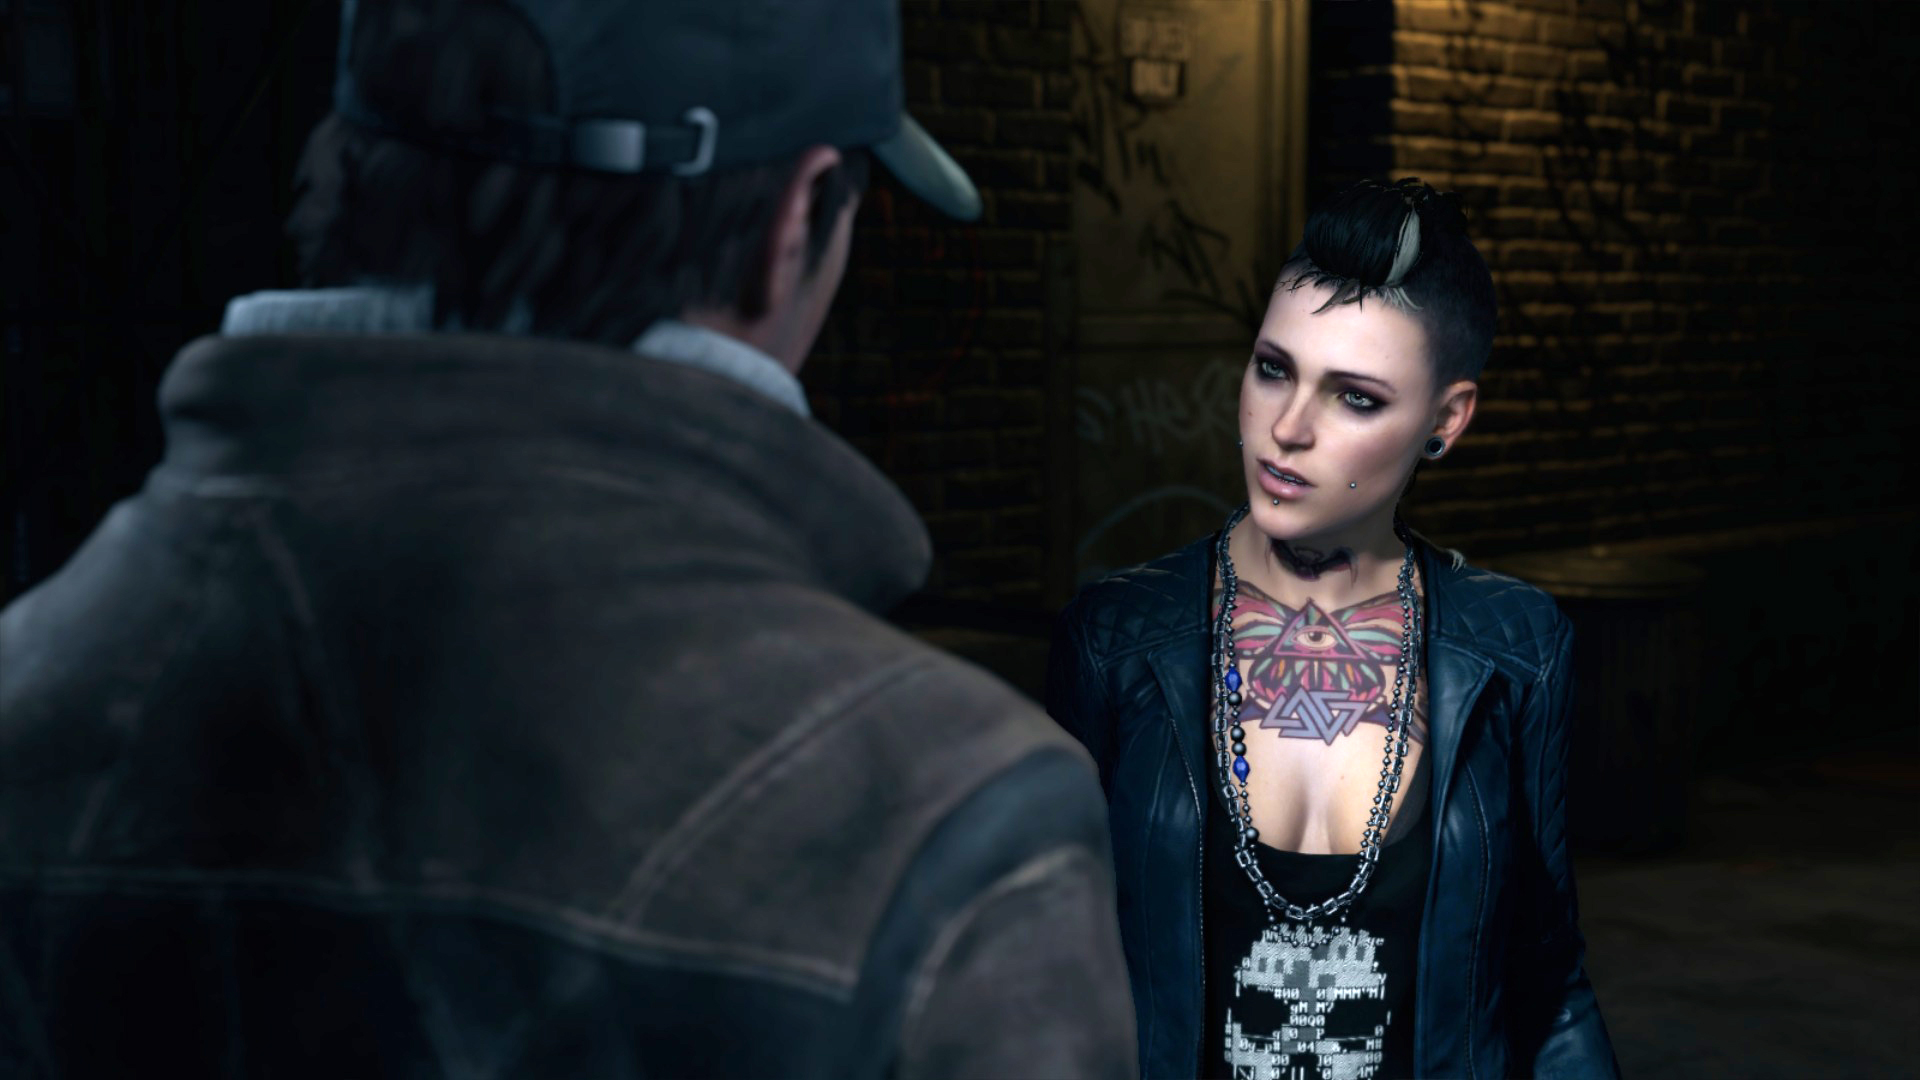 WATCH_DOGS™_20140530165029